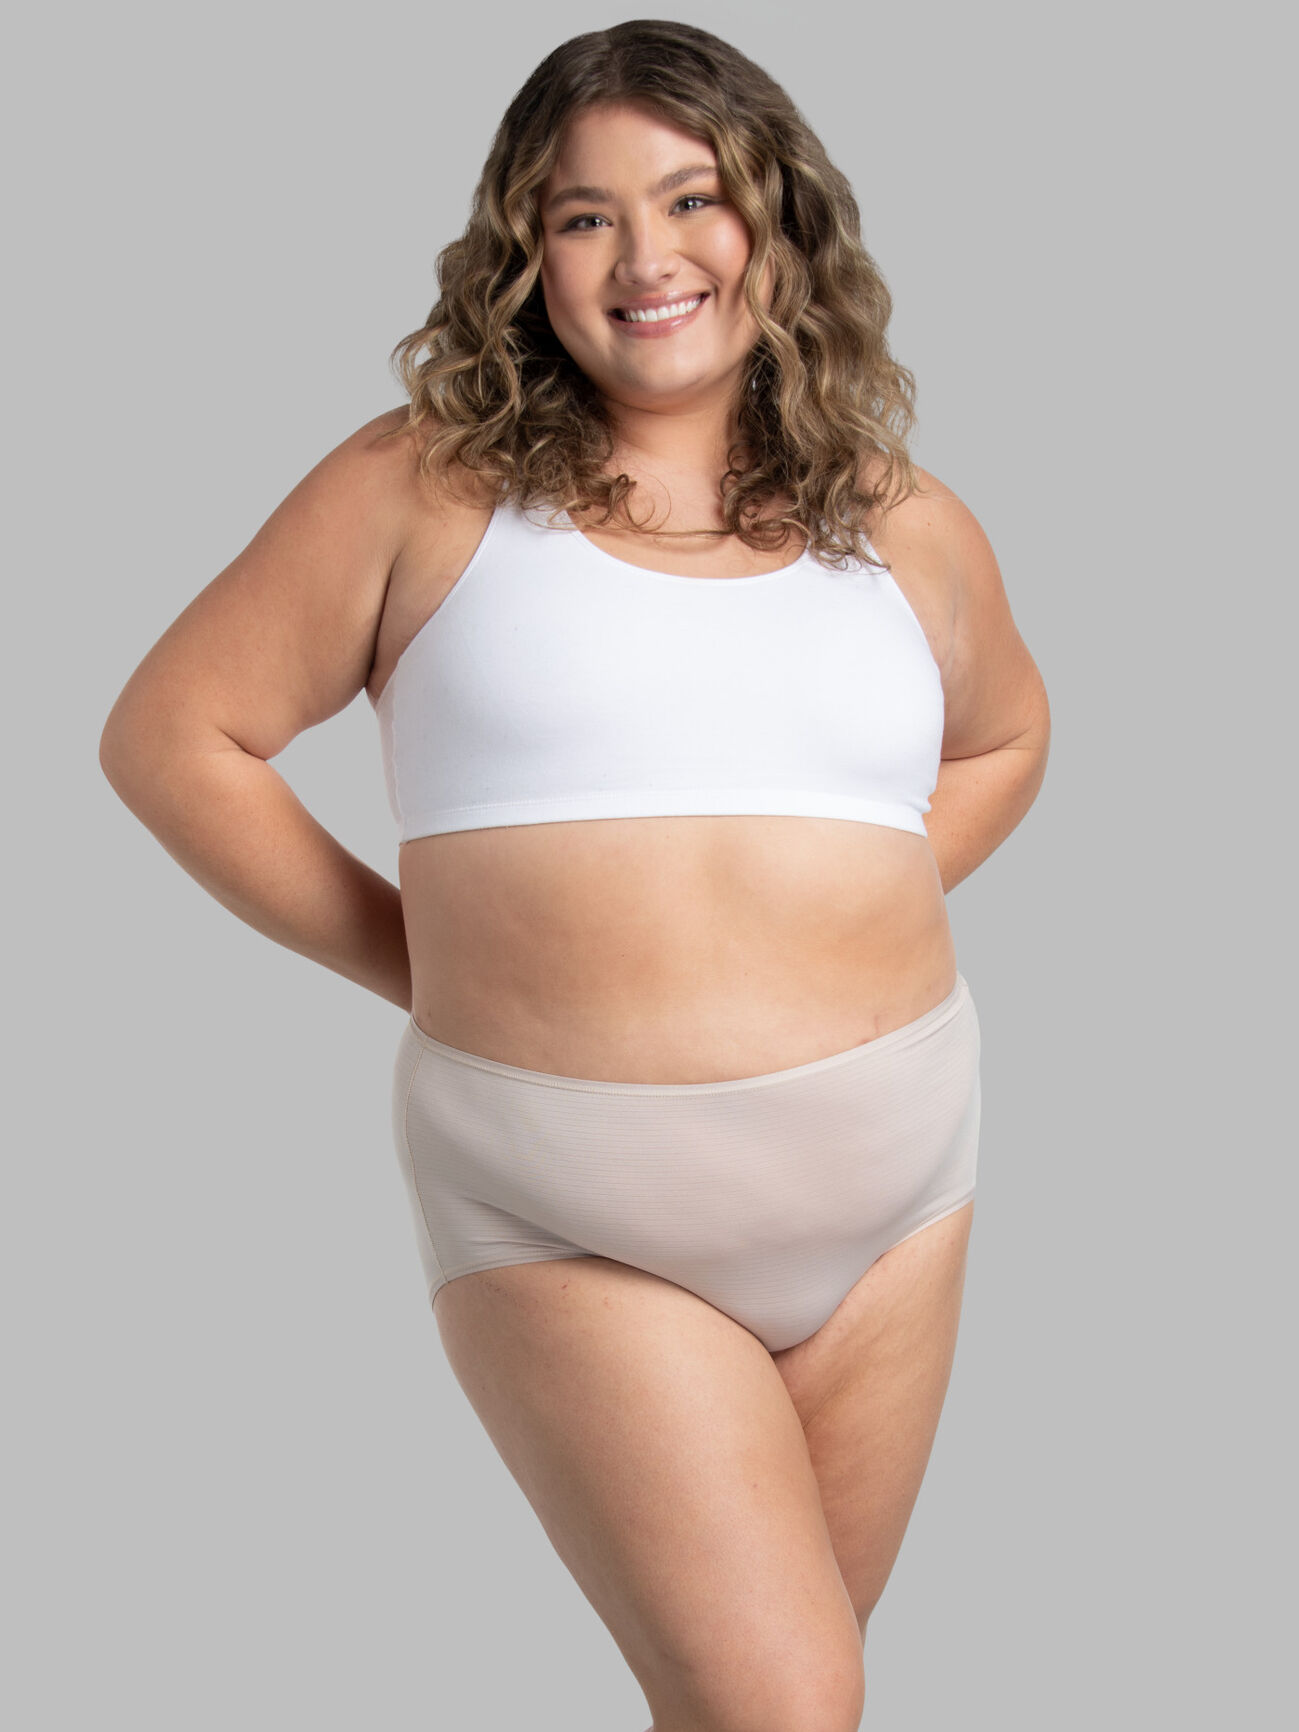 Maternity Underwear 3-Pack - Seamless, Cooling, Moisture-Wicking